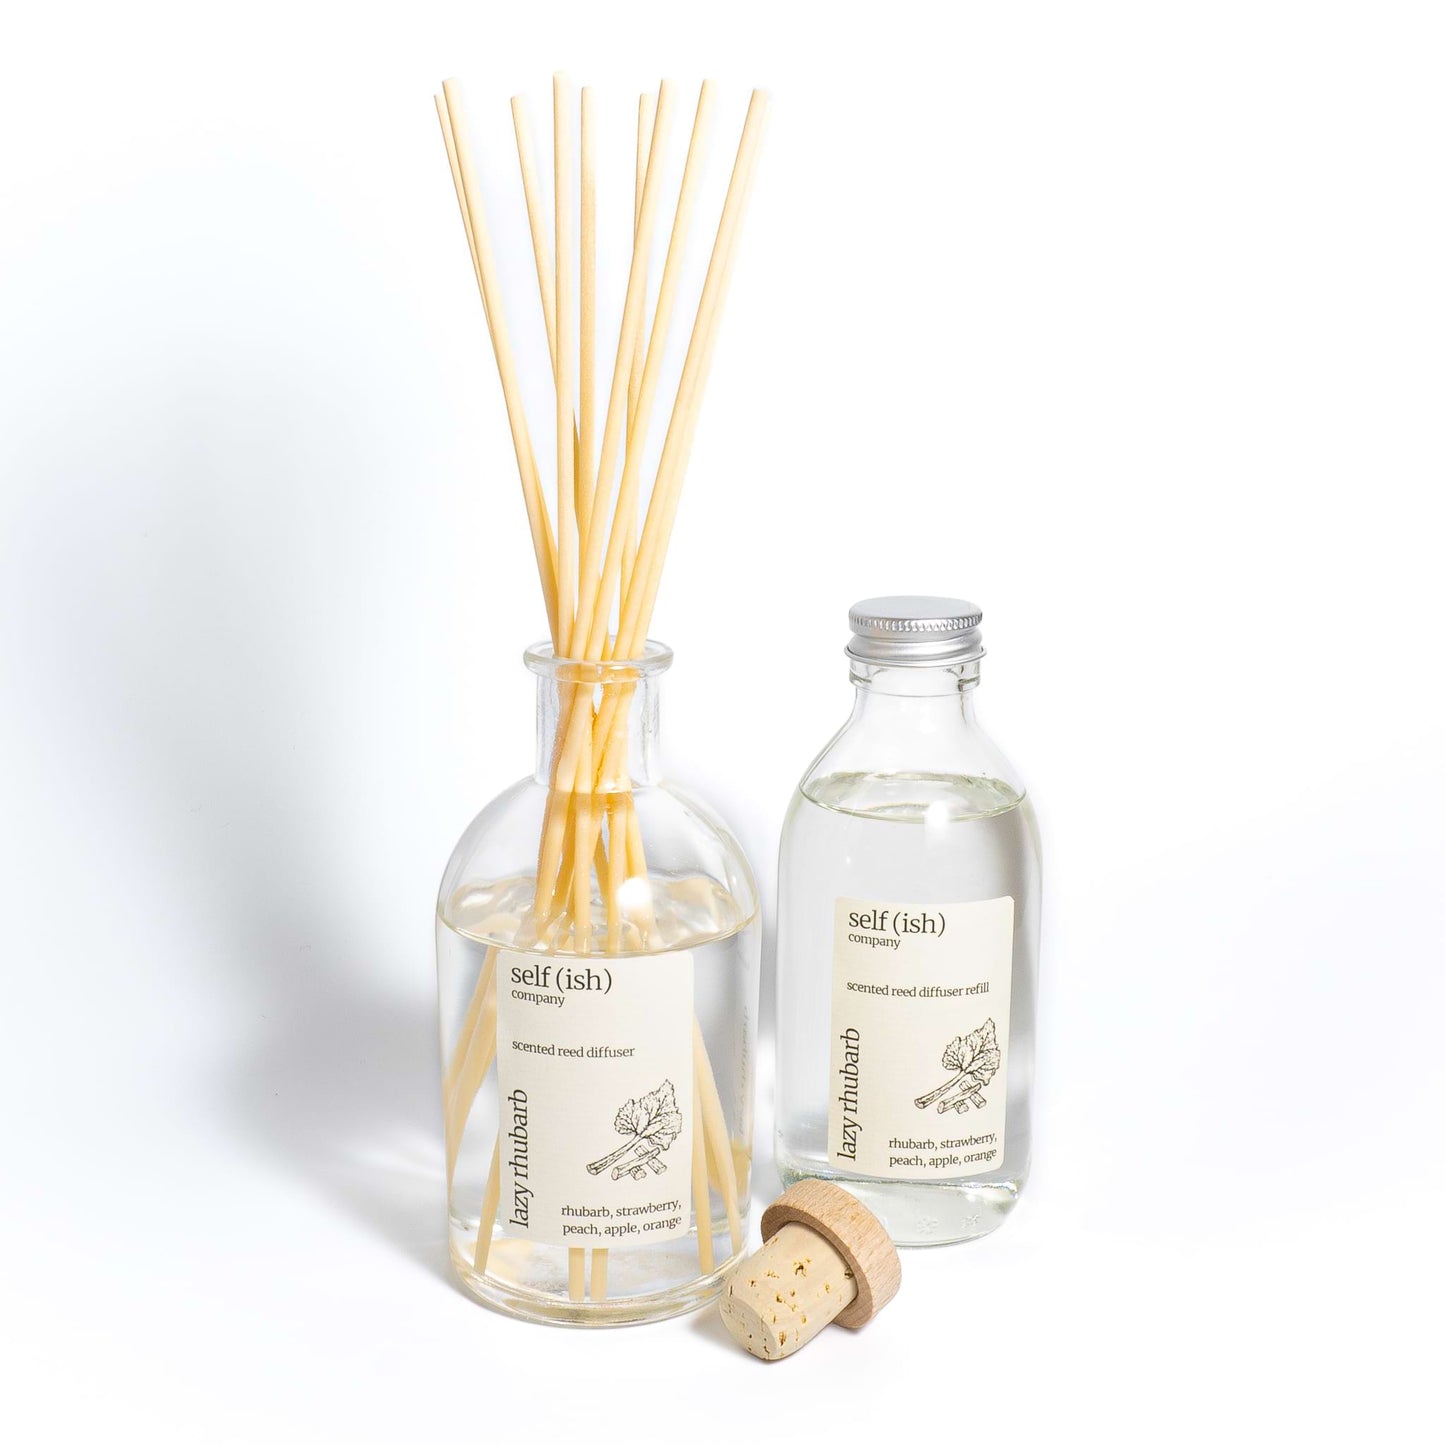 Rhubarb diffuser refill bottle next to rhubarb reed diffuser